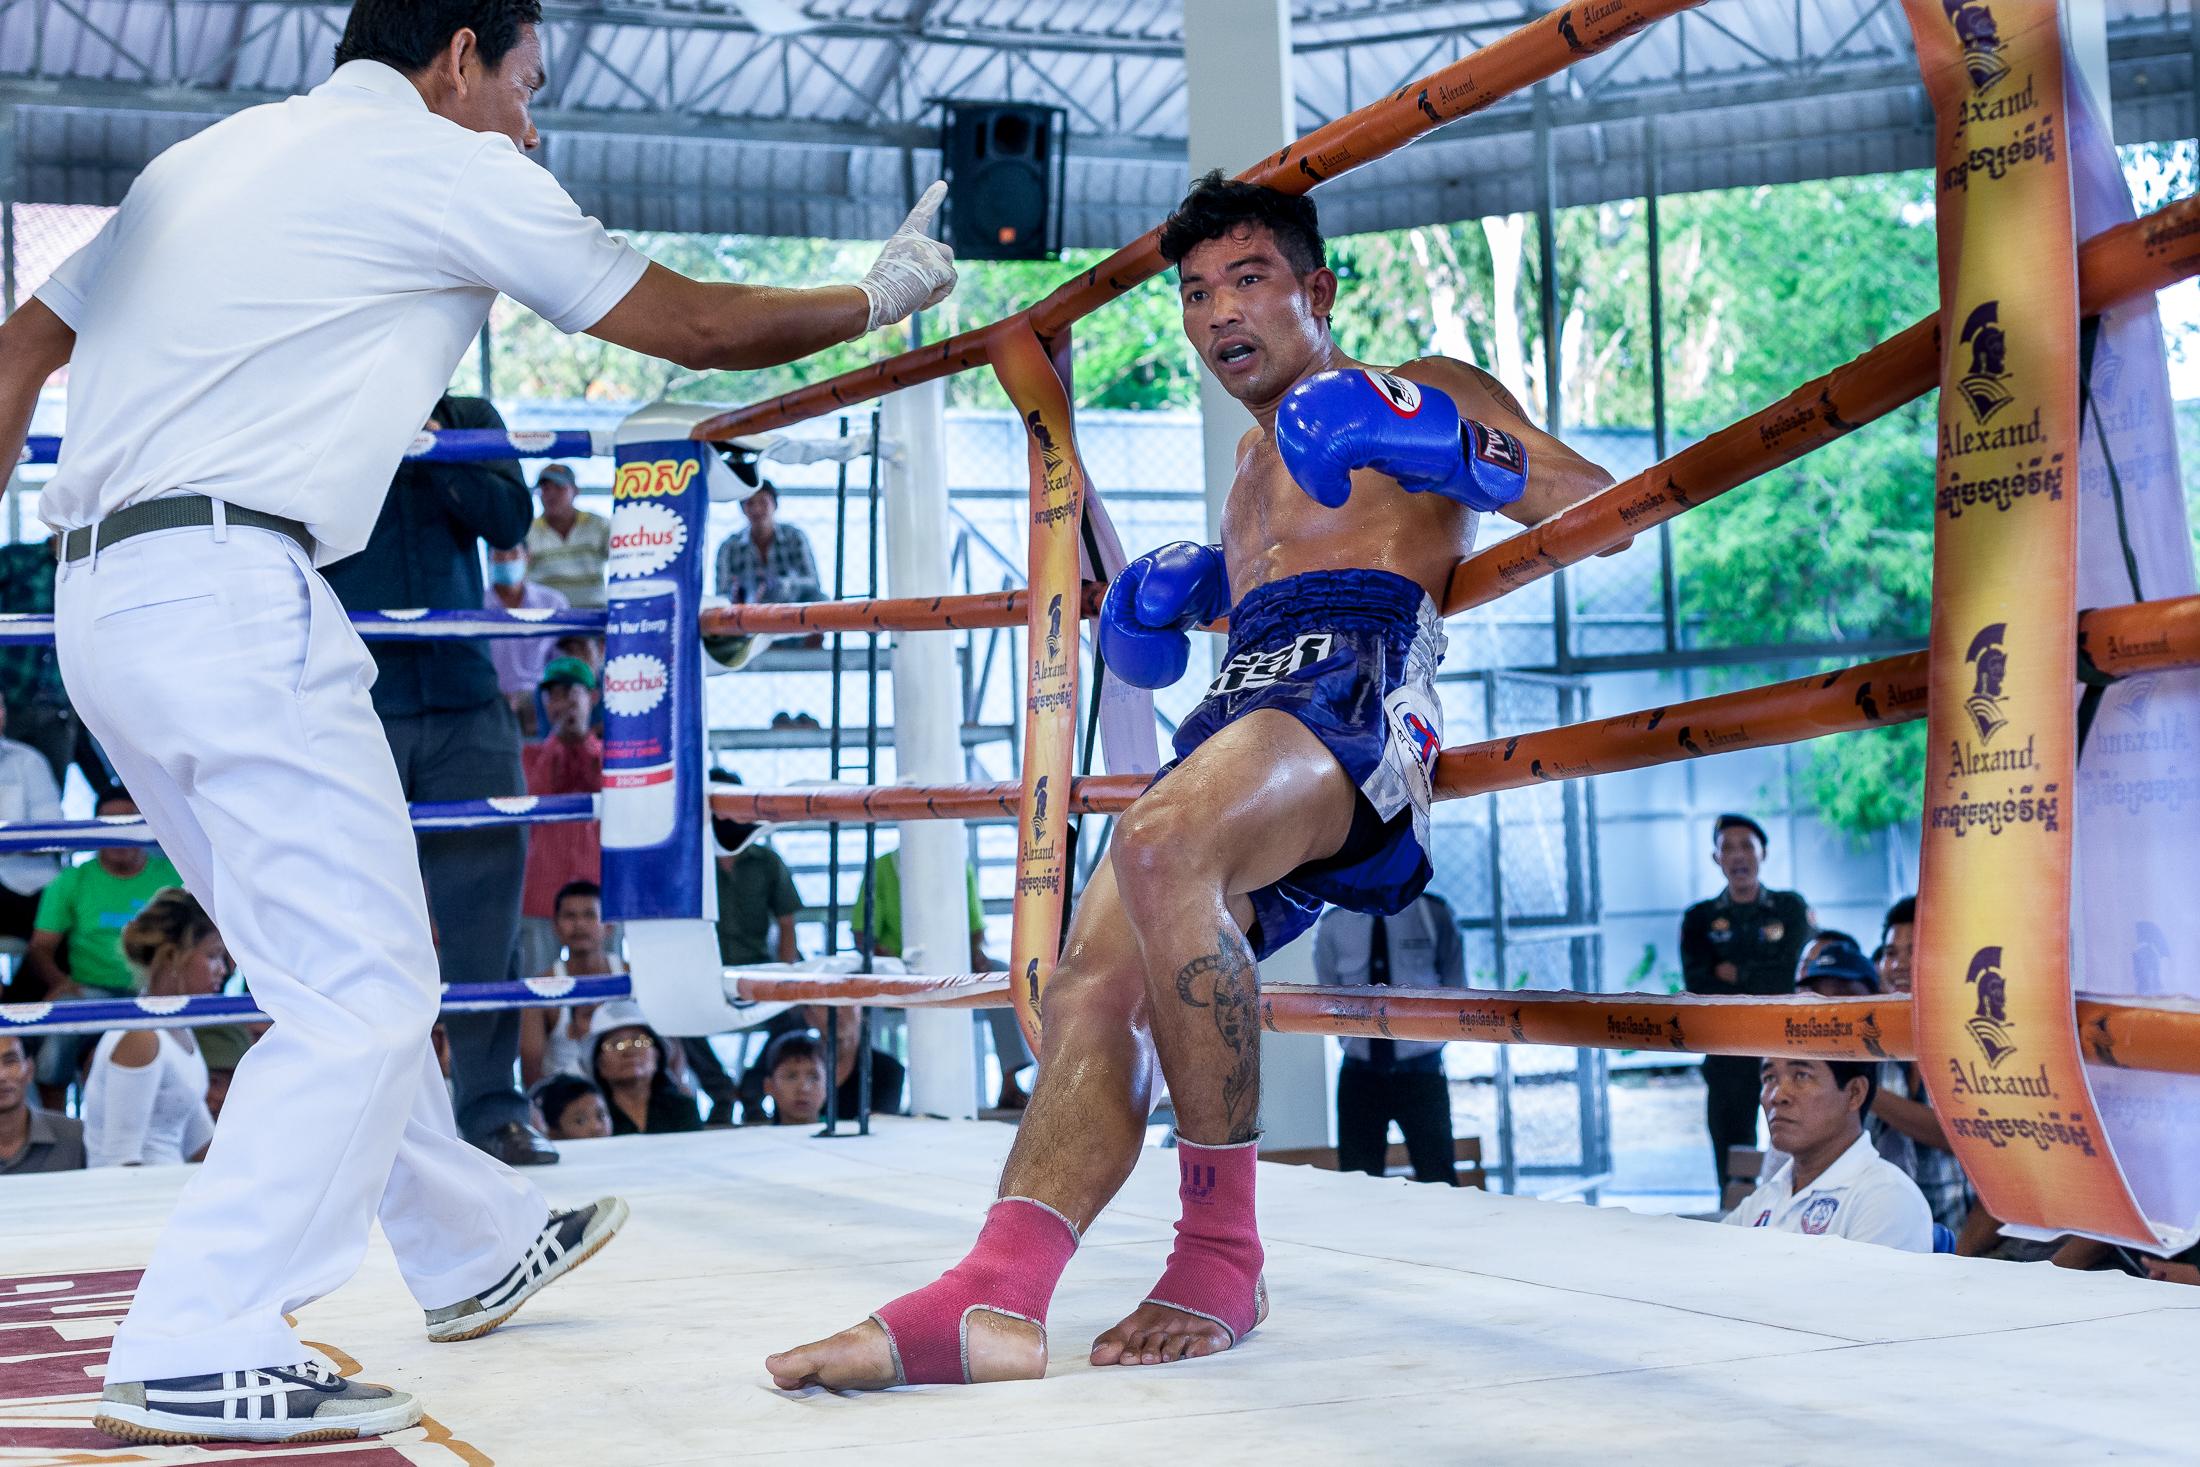 The Khmer Fighters